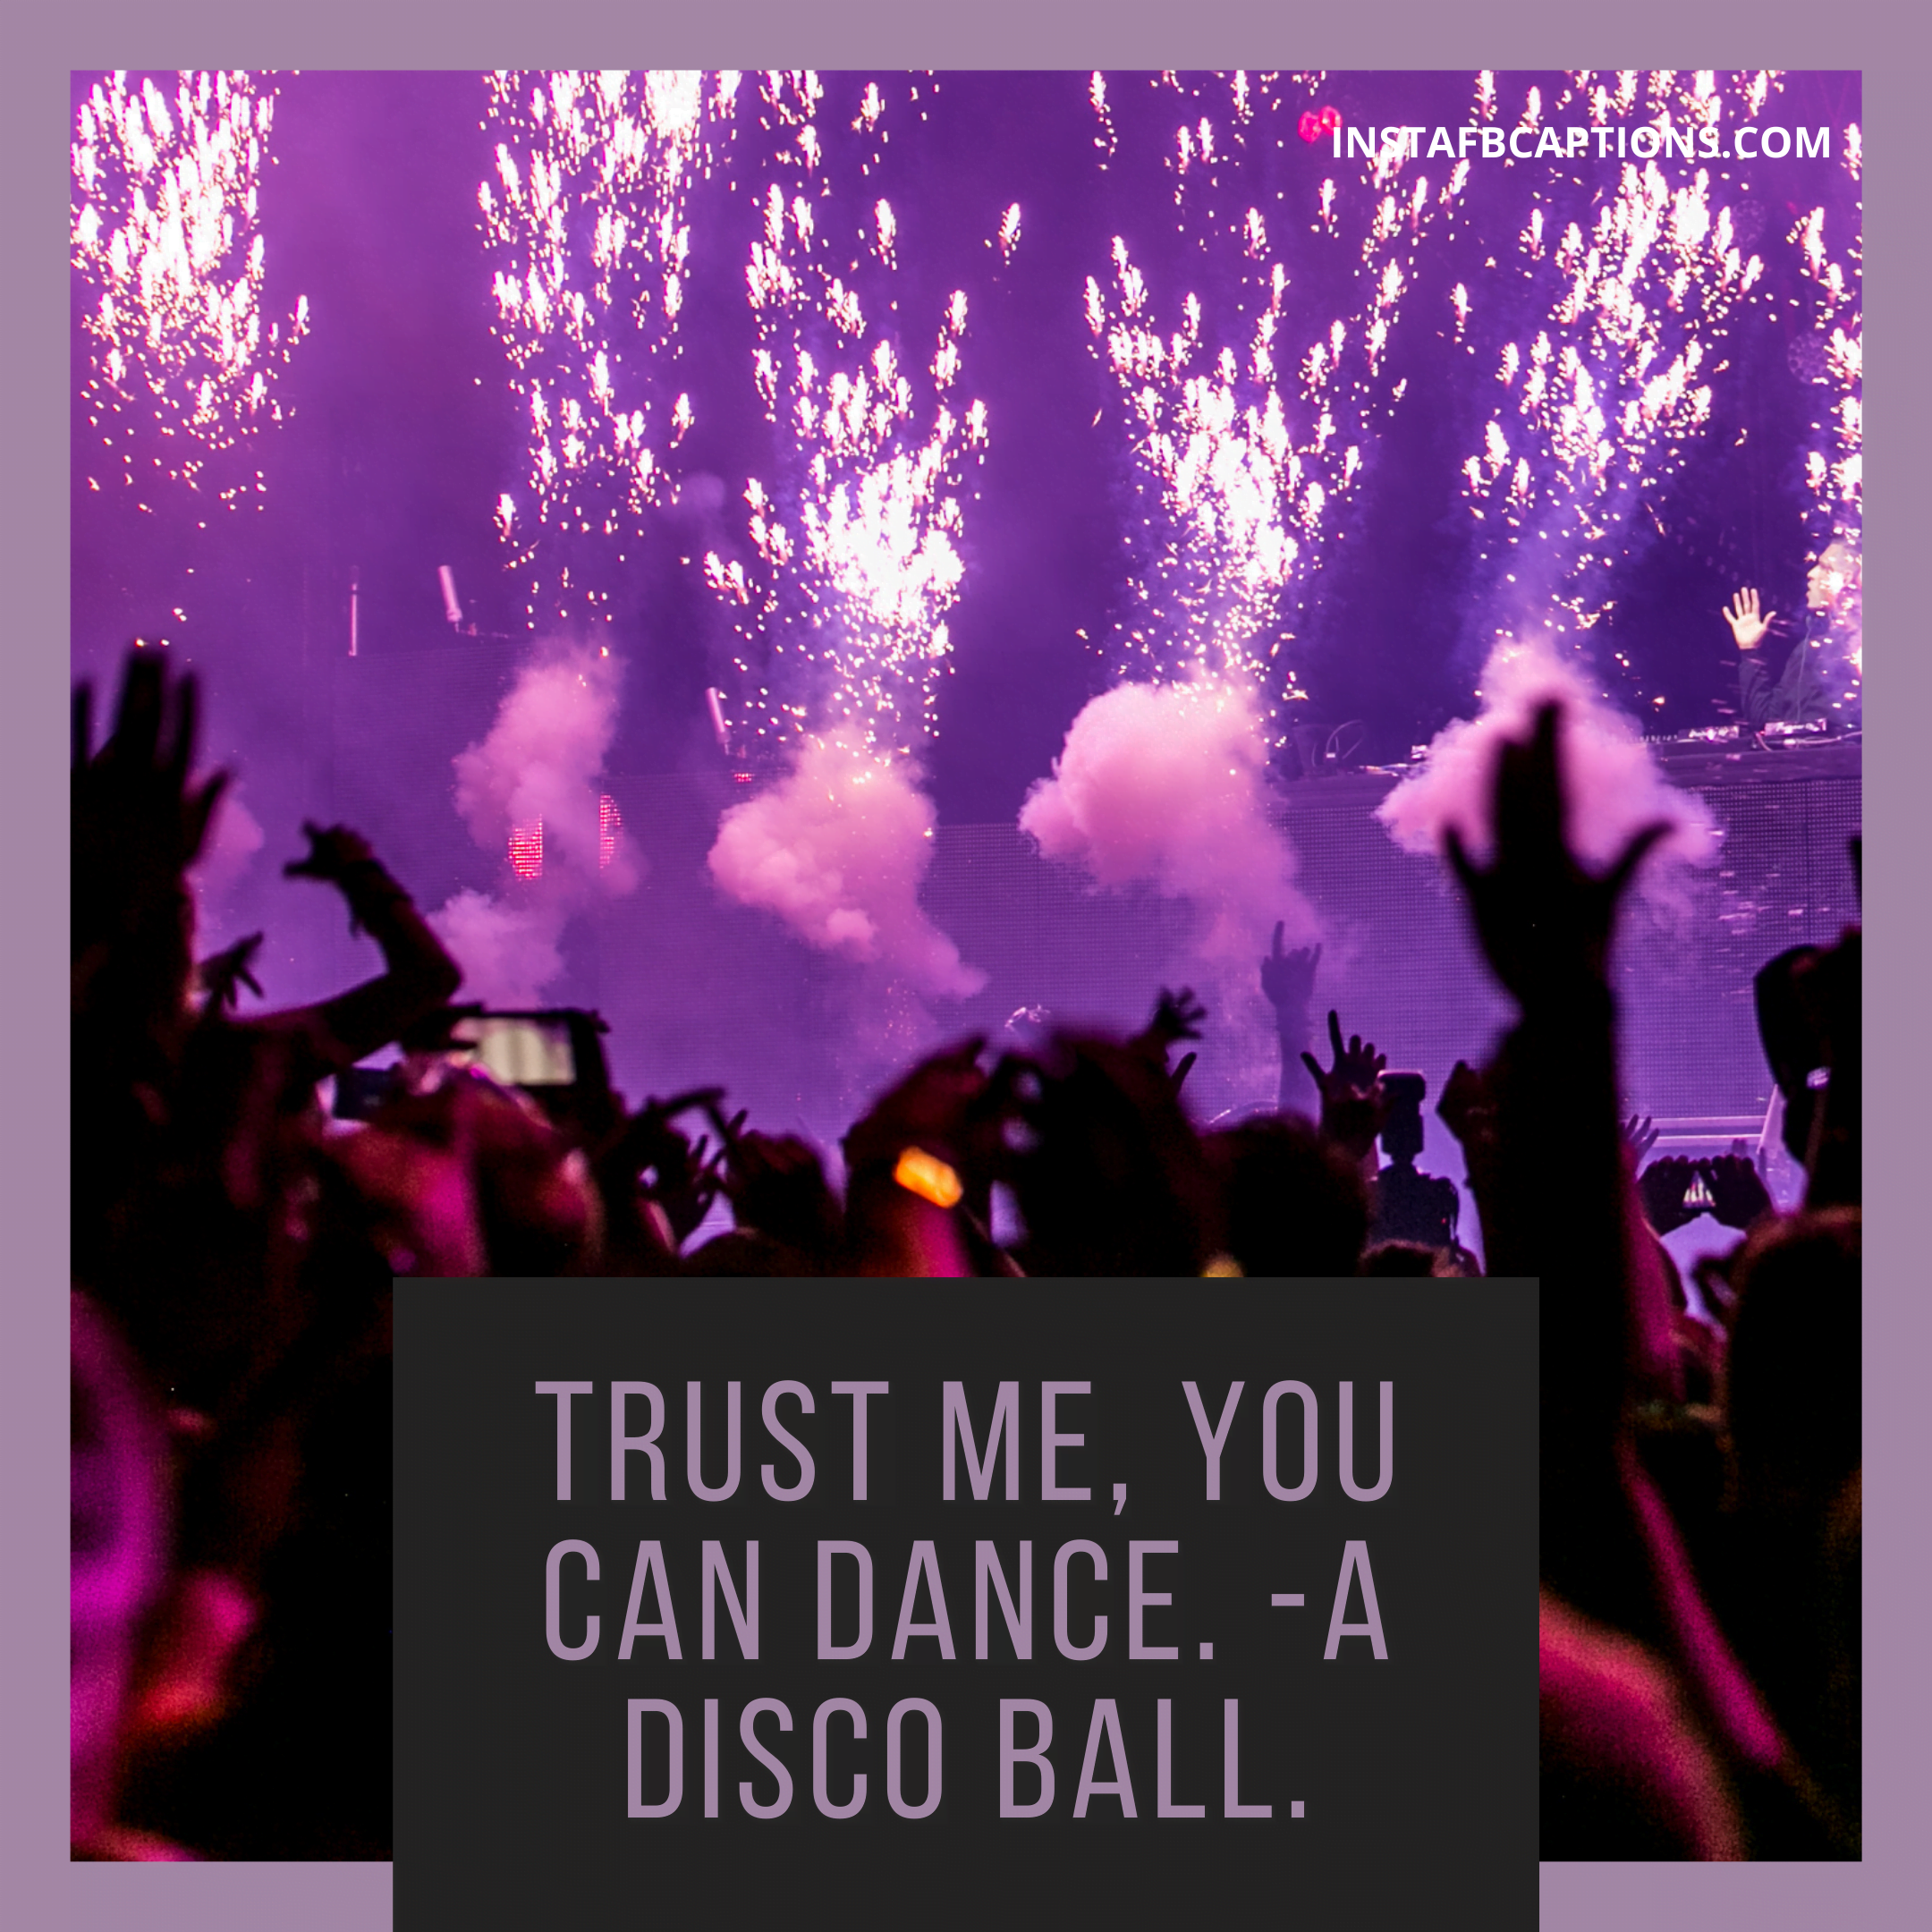 Disco Captions To Amaze People With Your Pictures  - Disco Captions to Amaze People with Your Pictures - DISCO Instagram Captions &#038; Quotes for Dance Pictures in 2022